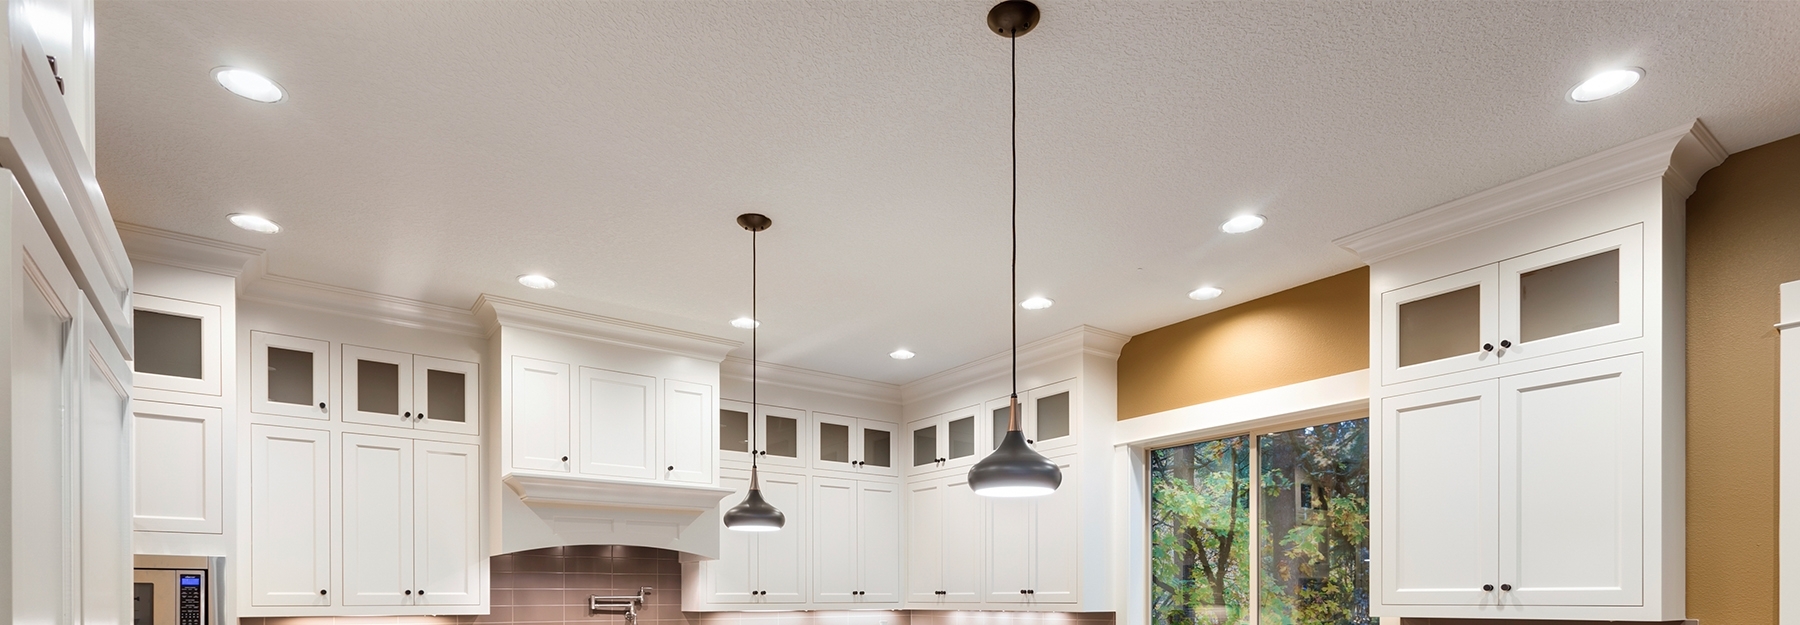 Kitchen cabinets and lighting image